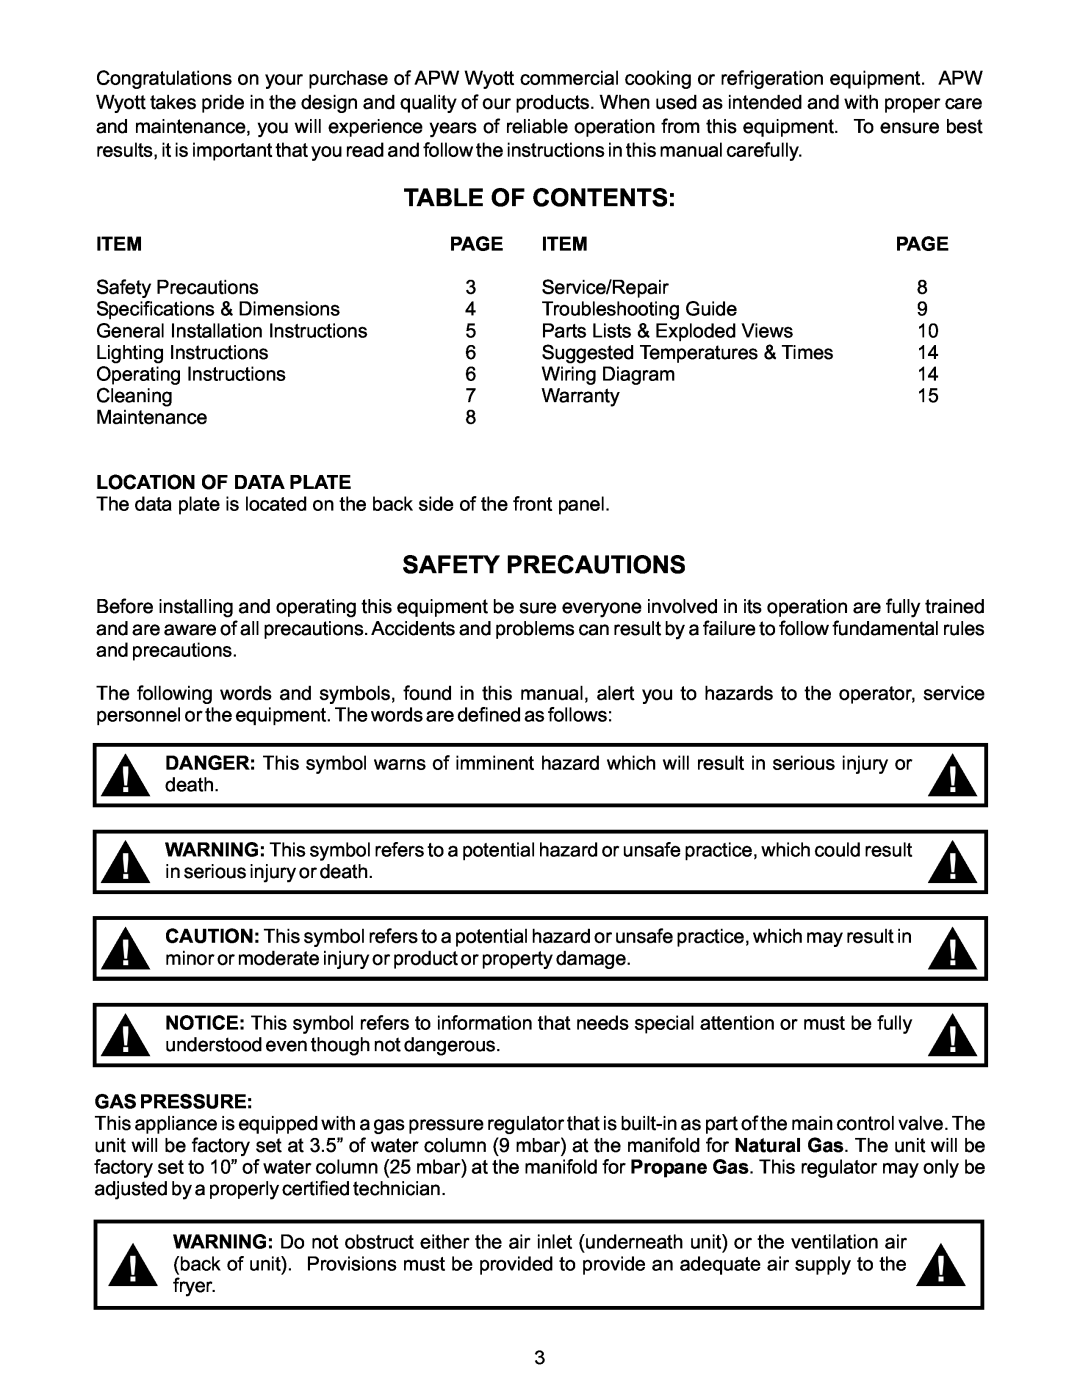 APW Wyott GF-15HLP Table Of Contents, Safety Precautions, Page, Location Of Data Plate, in serious injury or death 